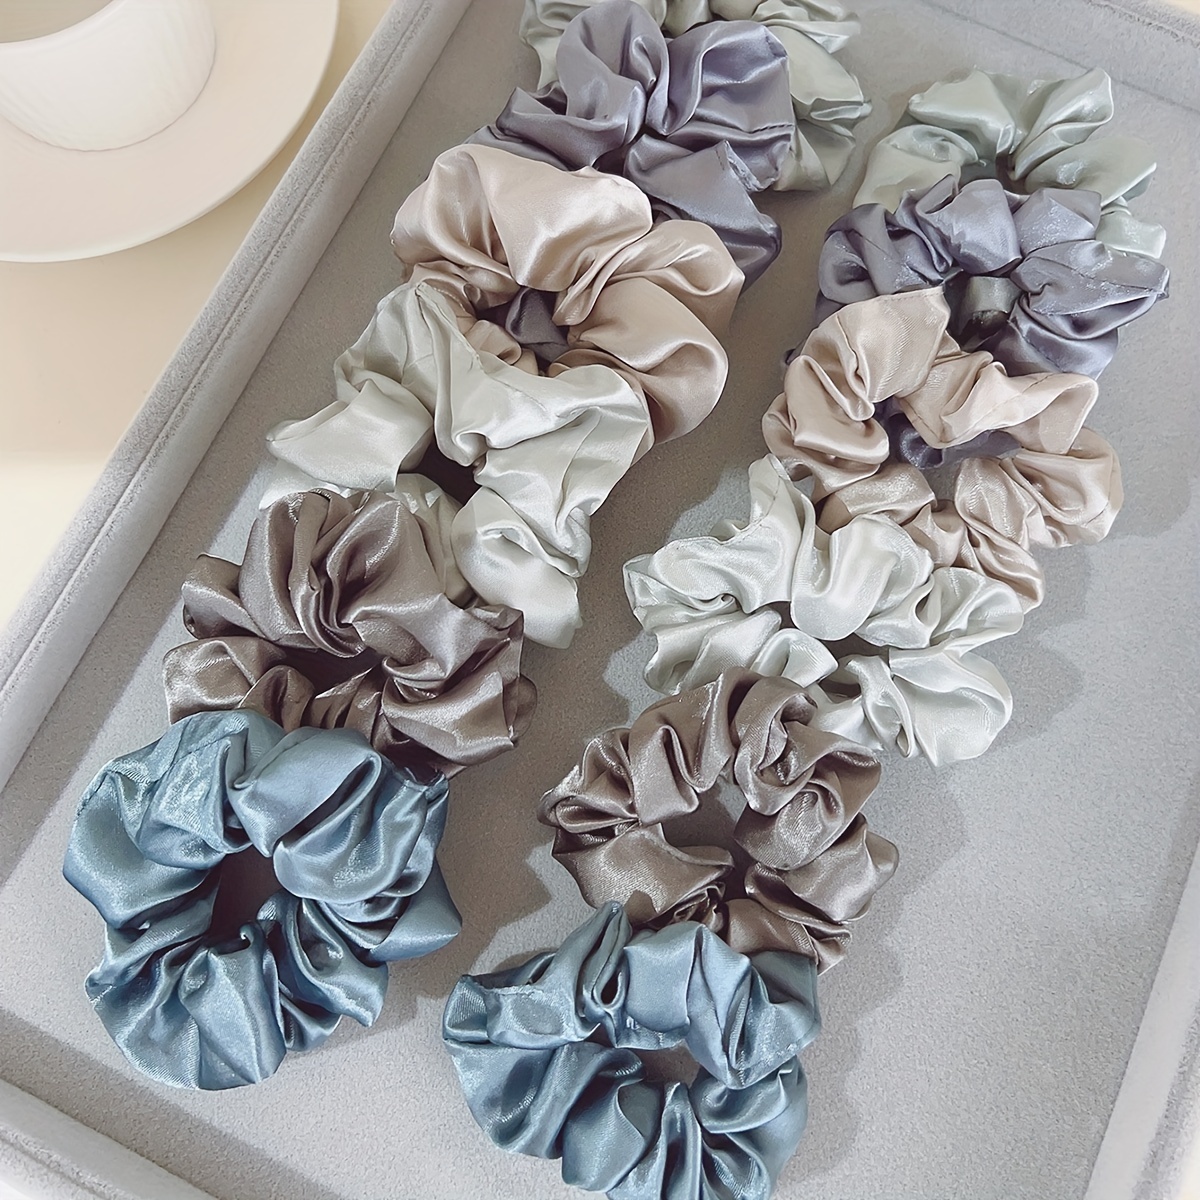 

12pcs Soft And Seamless Solid Color Scrunchies For Women And - Simple Style Hair Ties For Ponytails And Hair Accessories